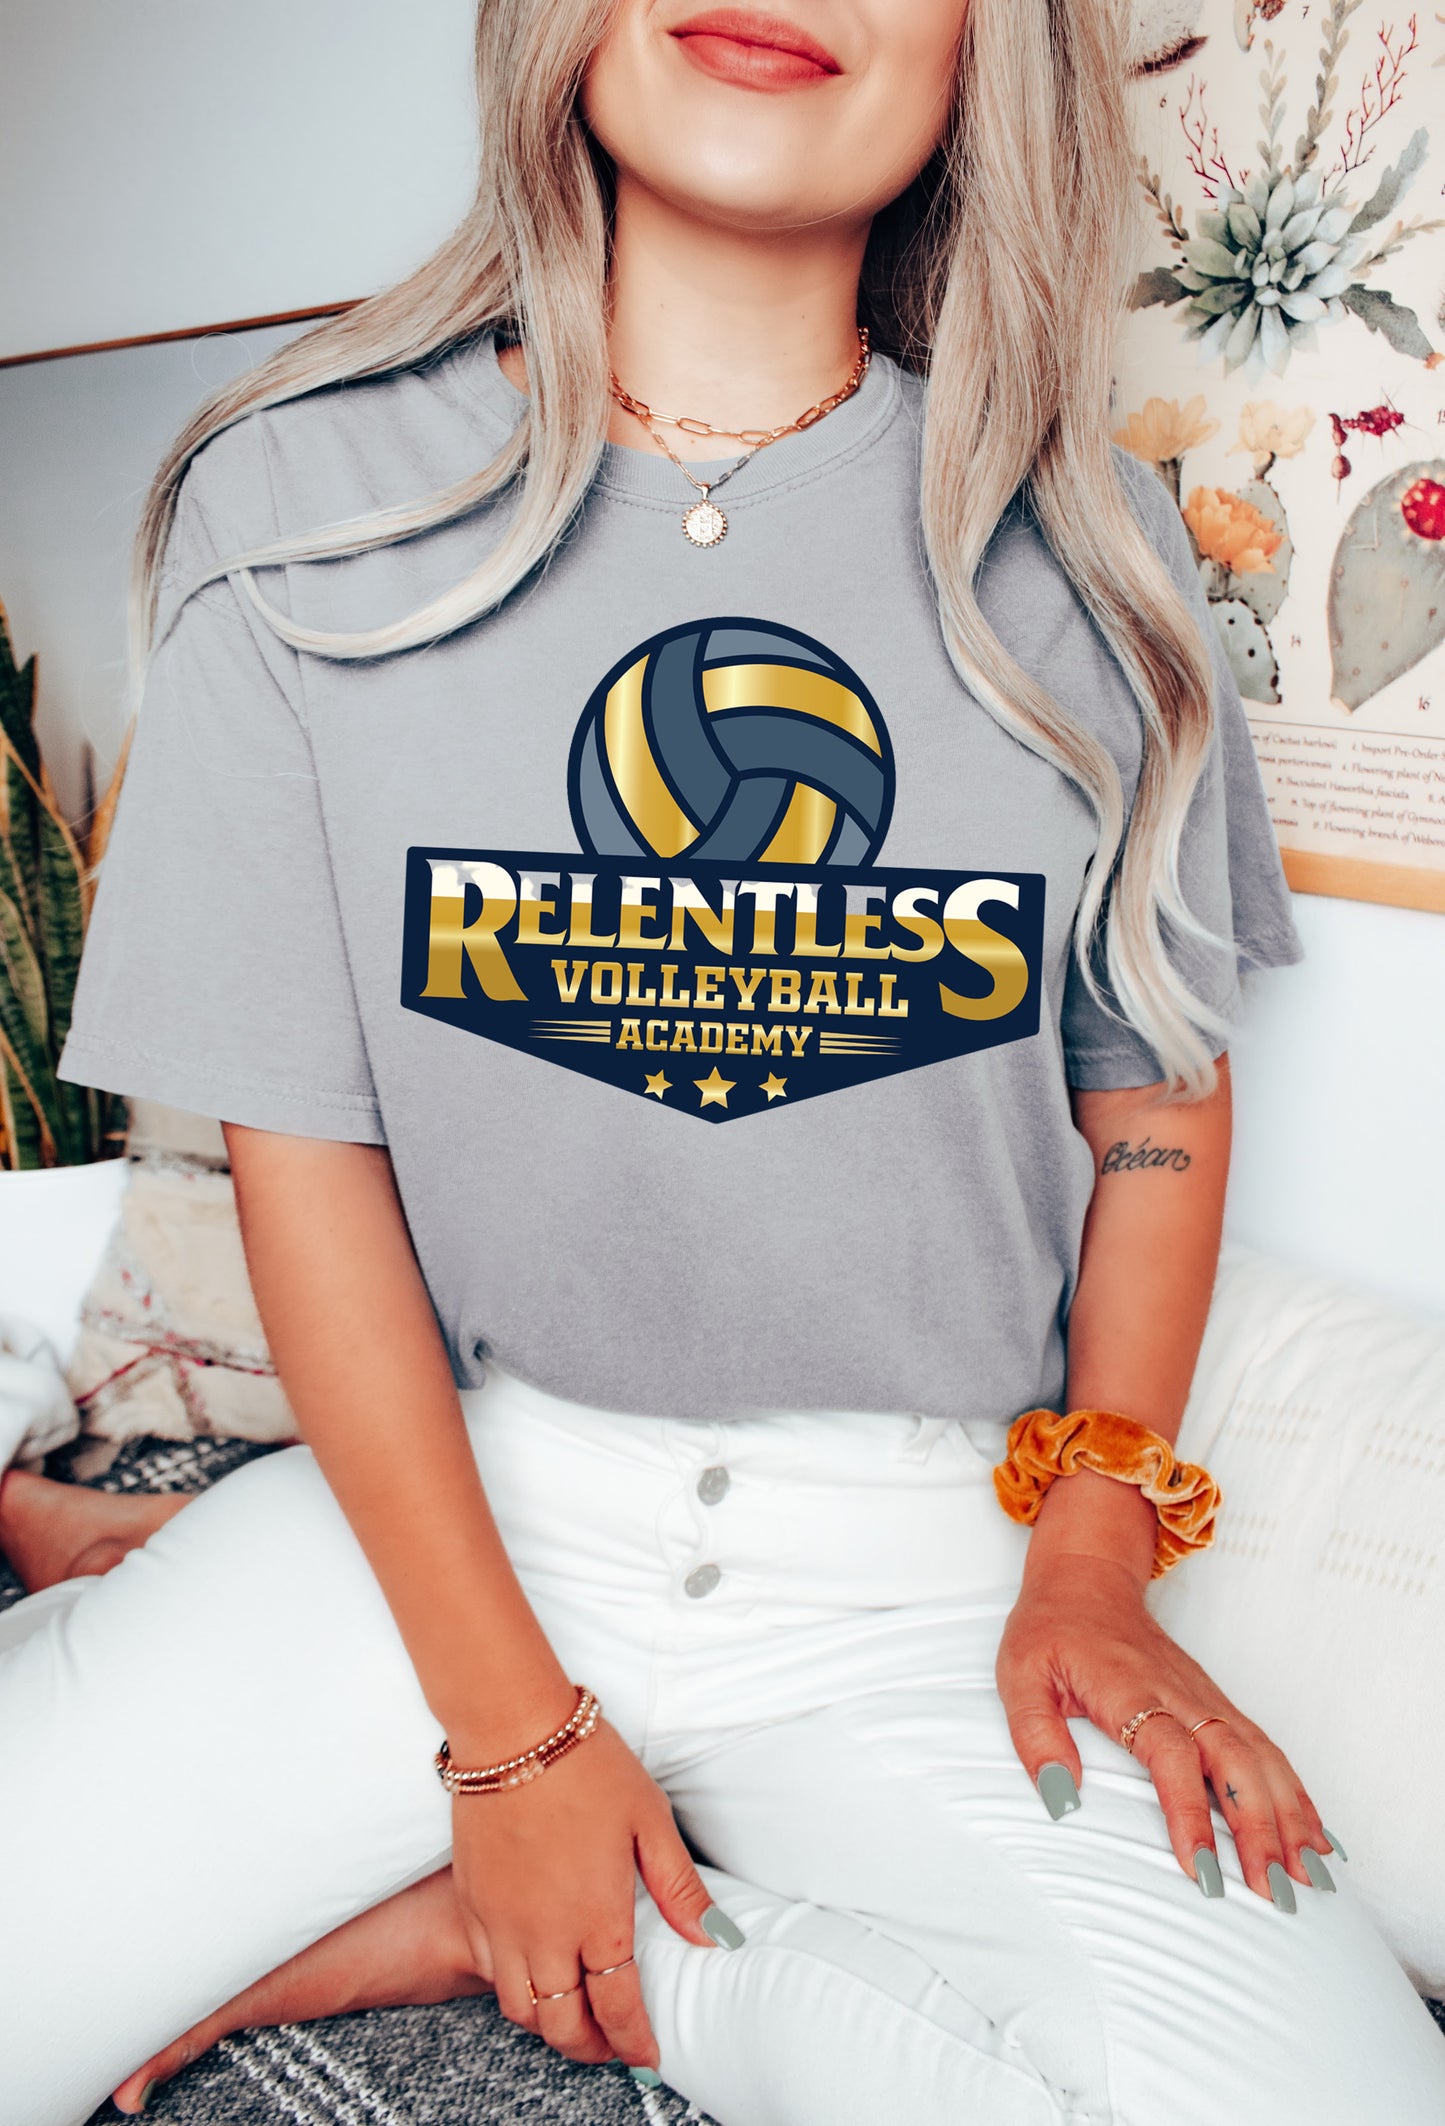 Relentless Volleyball Academy Tee/ Toddler, Youth, and Adult Sizes / Comfort Colors or Bella Canvas Brand